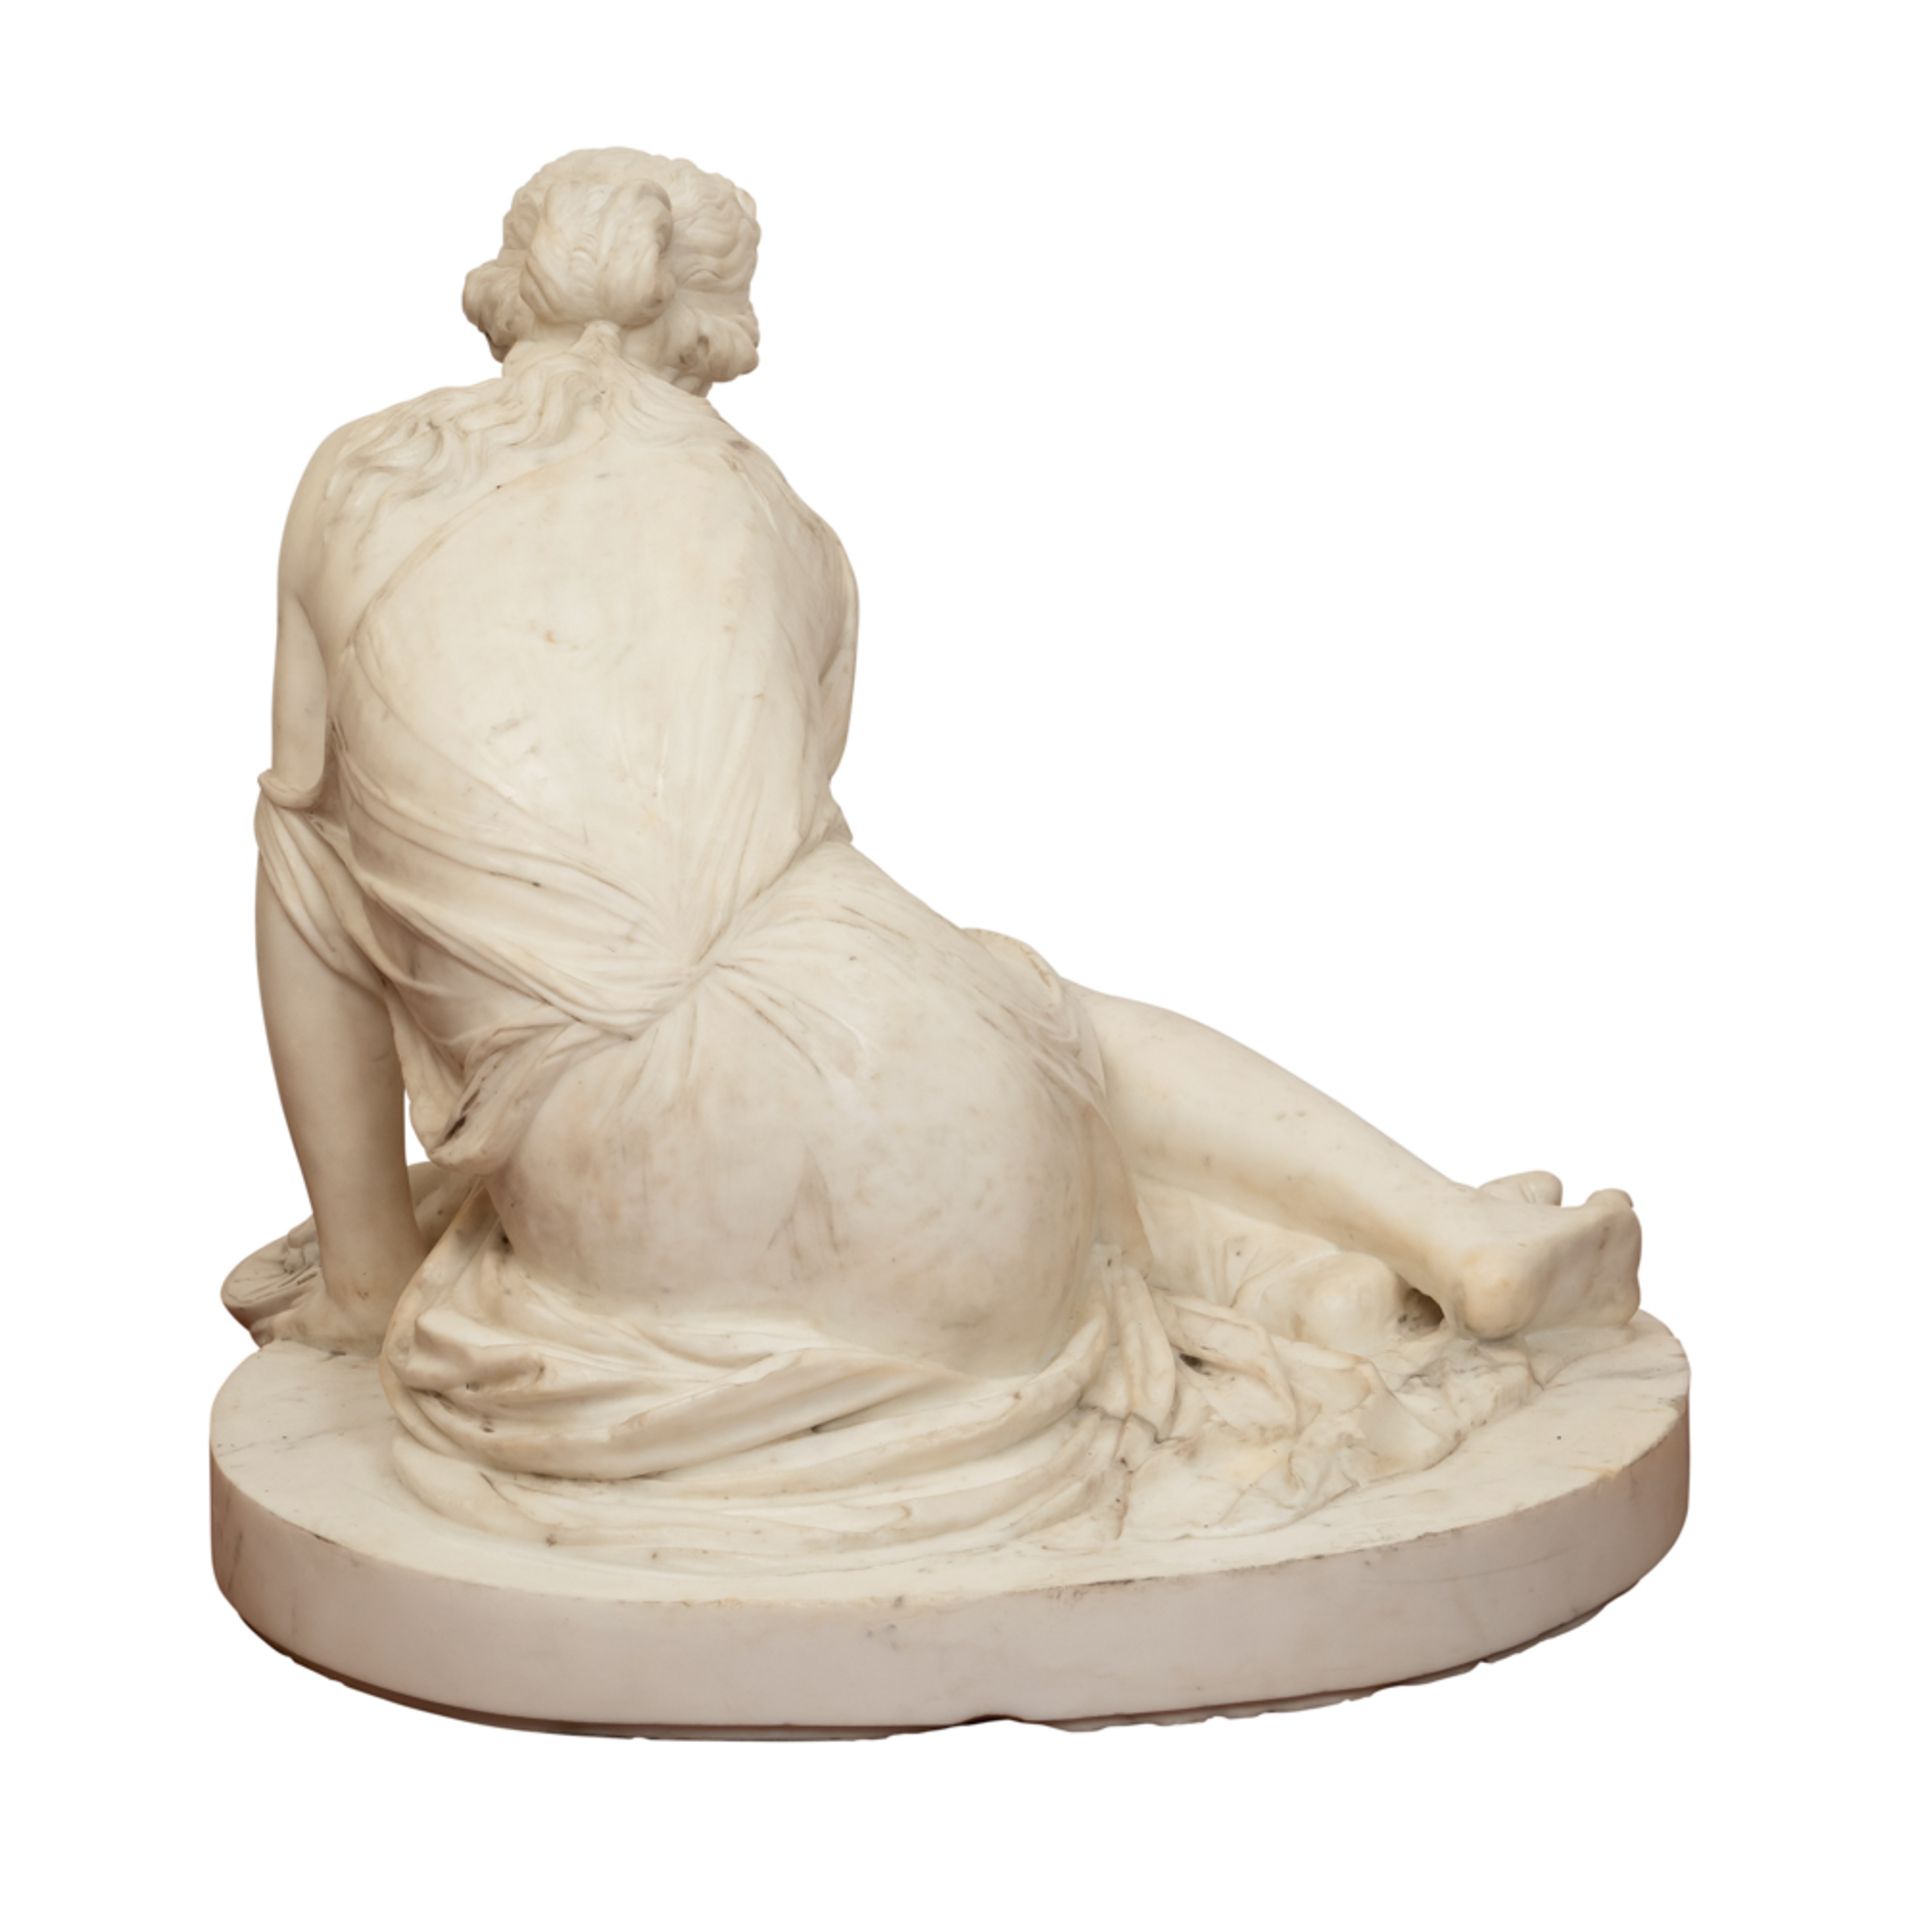 White marble sculpture 19th century 62x70x60 cm. - Image 2 of 2